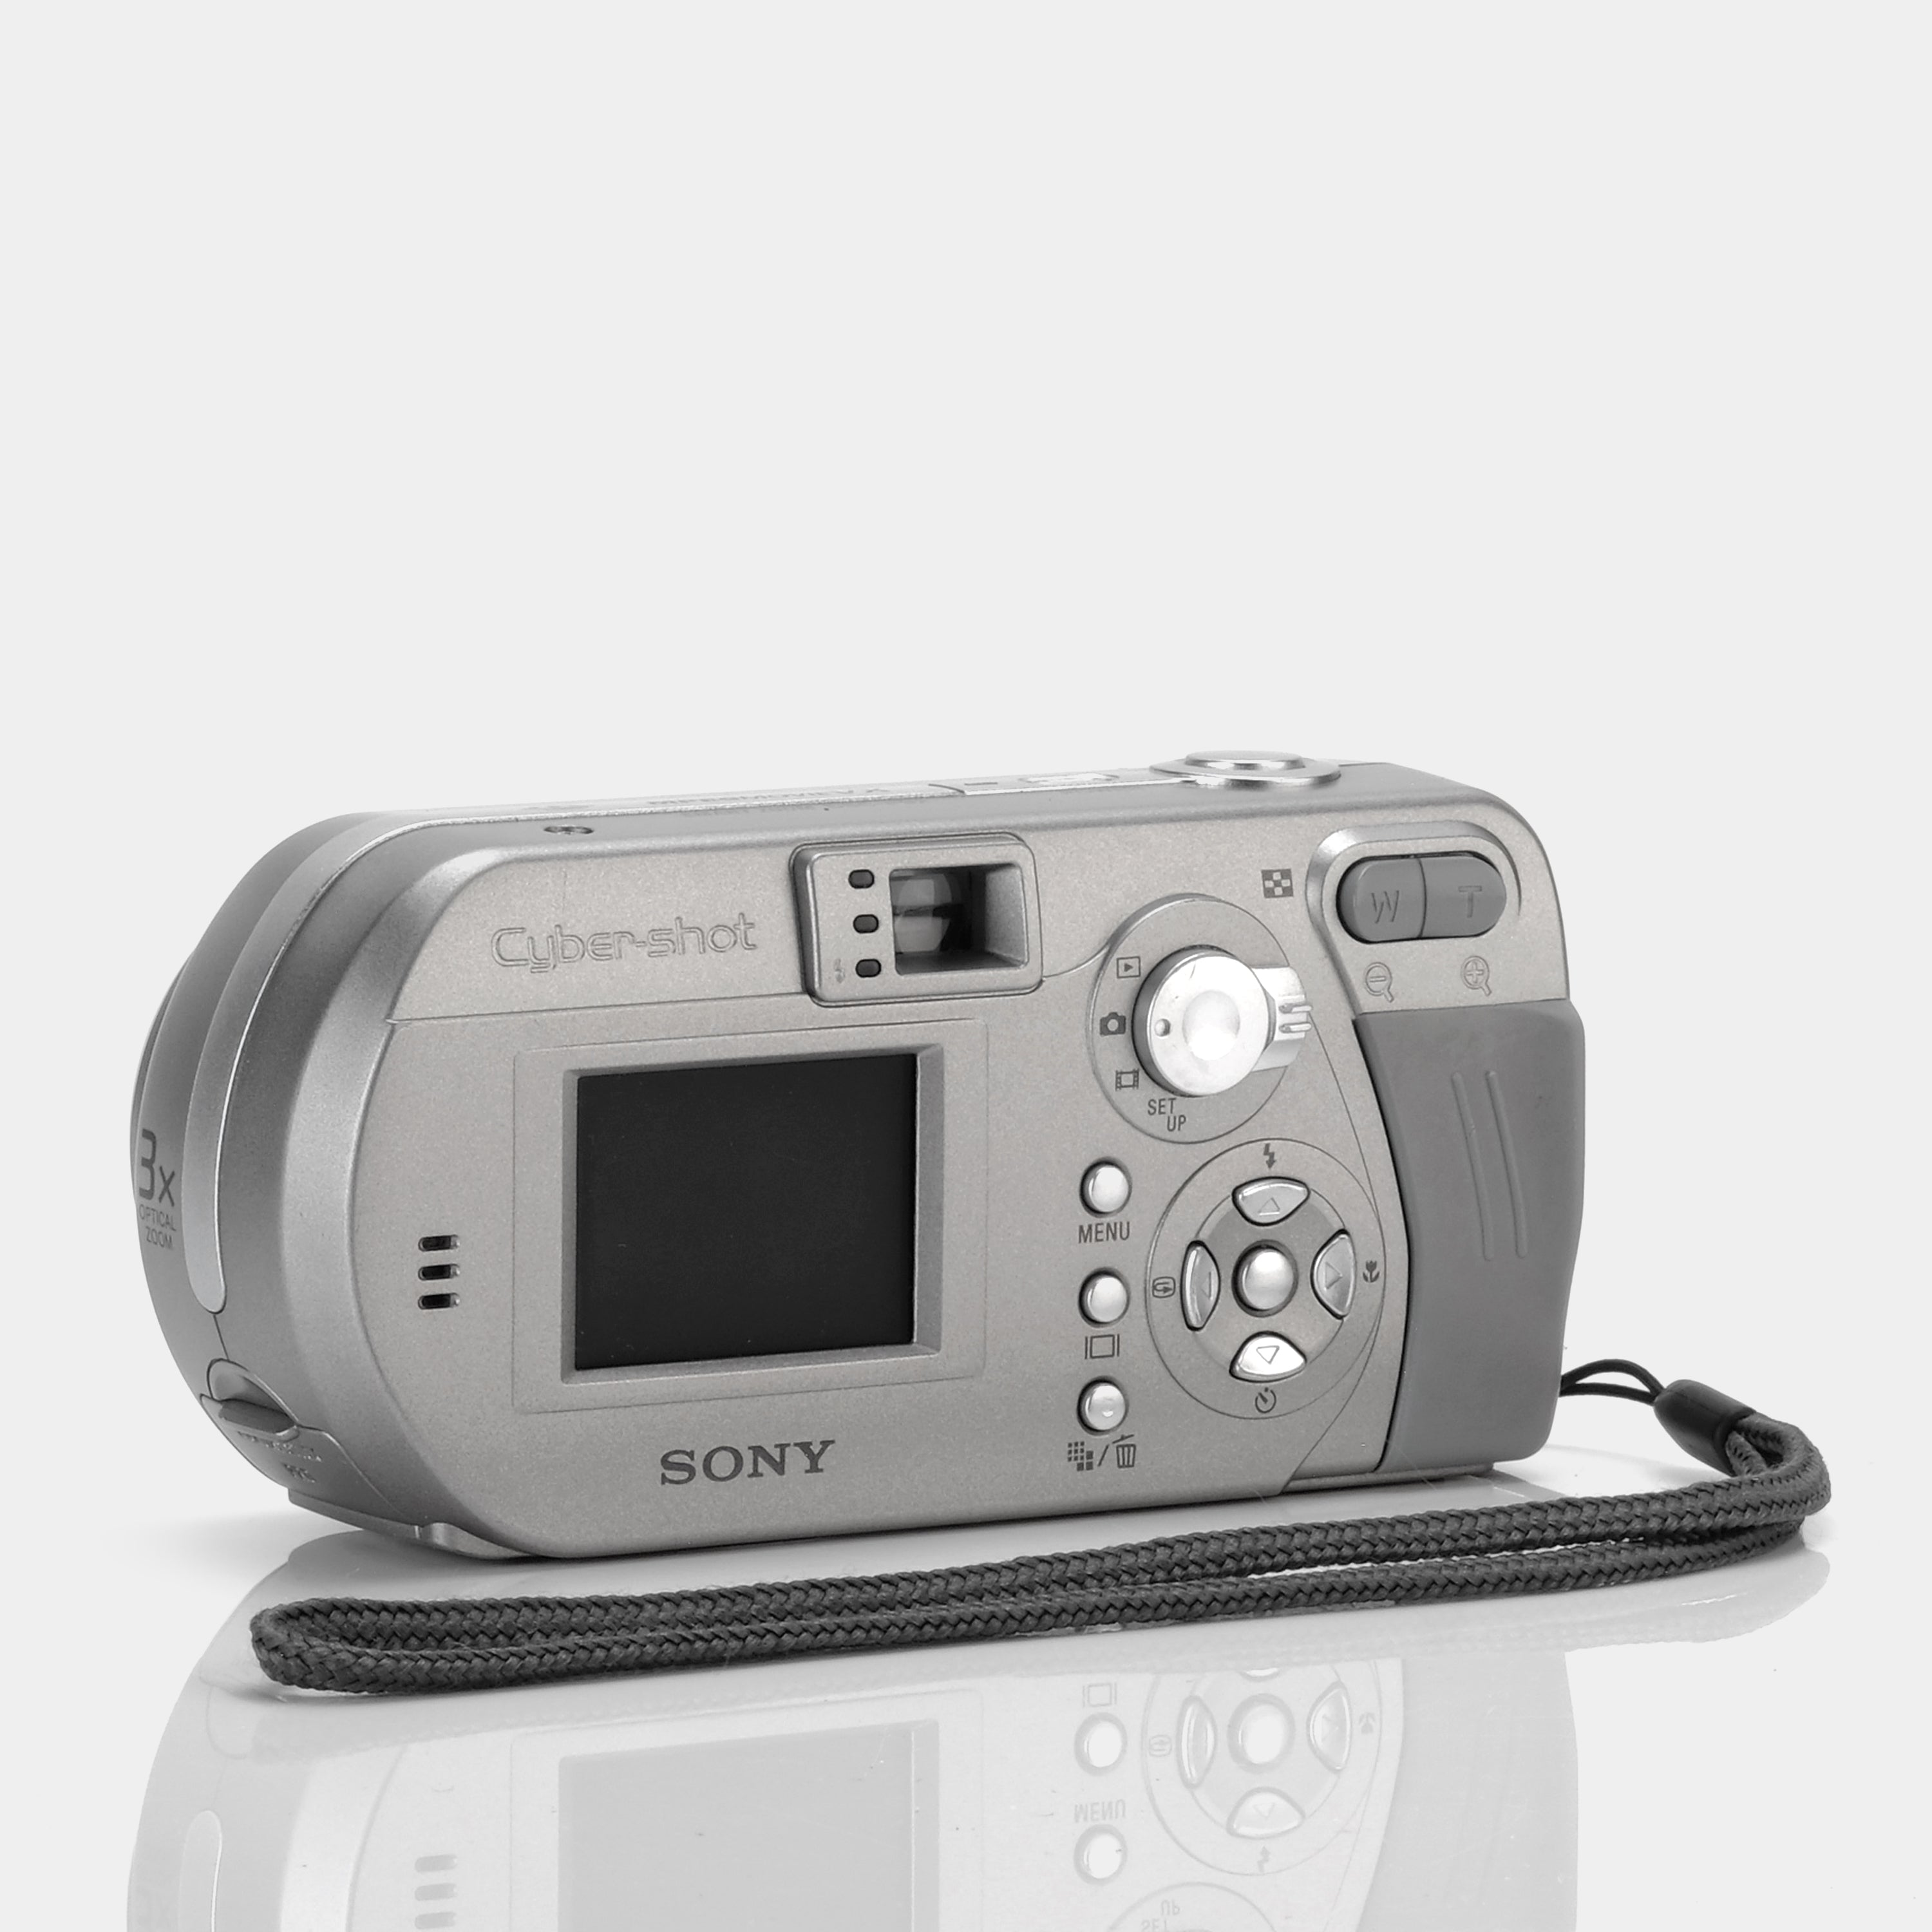 Sony Cyber-Shot Smart Zoom DSC-P92 Point and Shoot Digital Camera